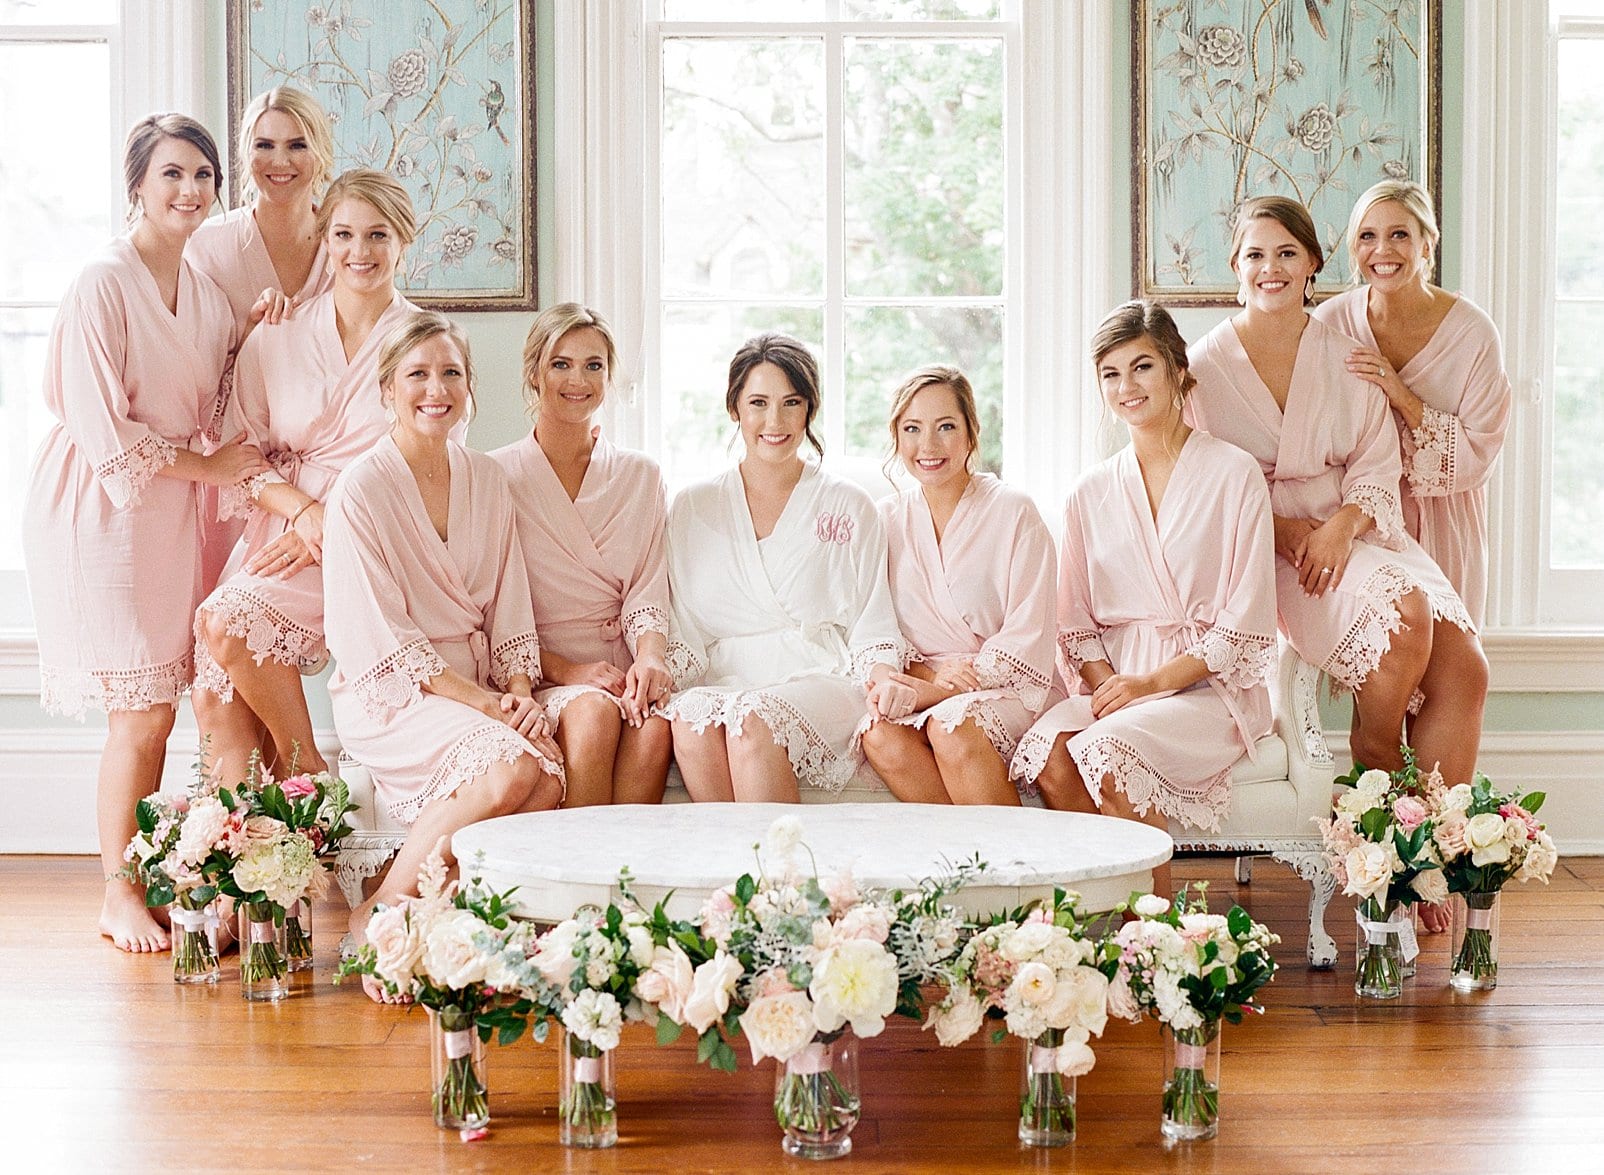 Merrimon Wynne bridesmaids and bride sitting together on the couch photo